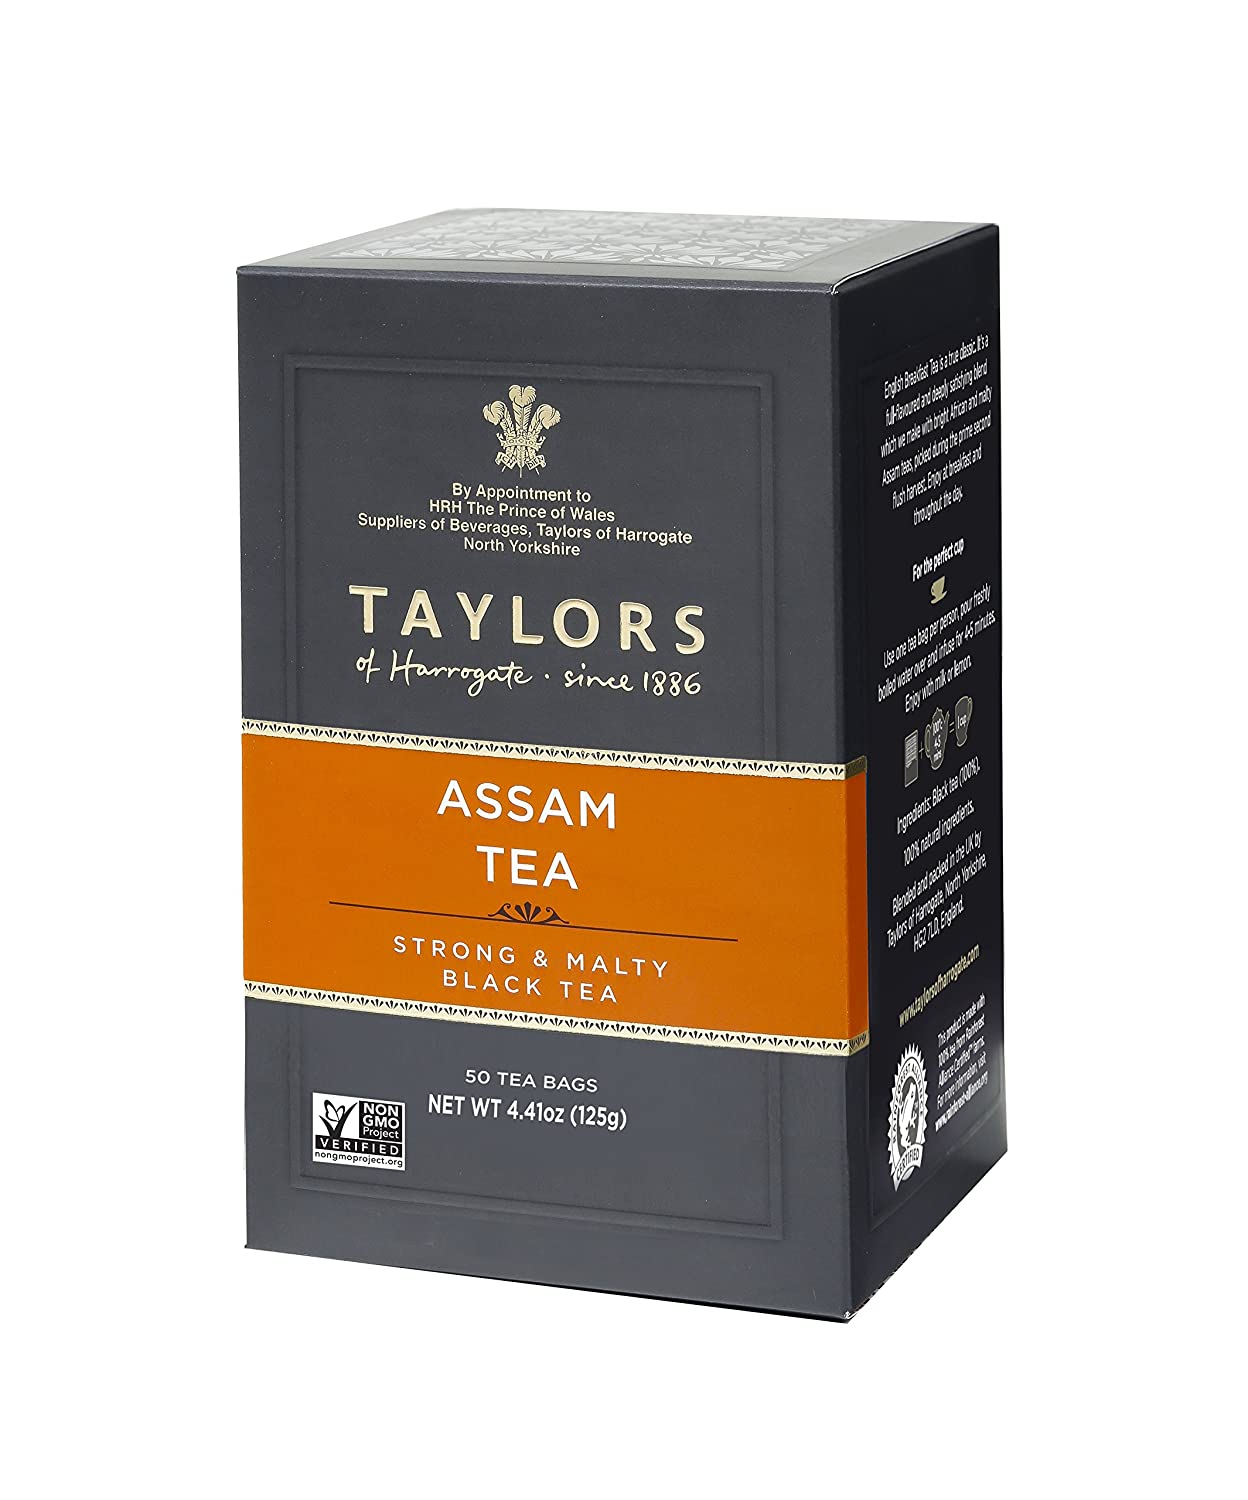 Taylors of Harrogate Pure Assam, 50 Teabags $4.43 with s/s